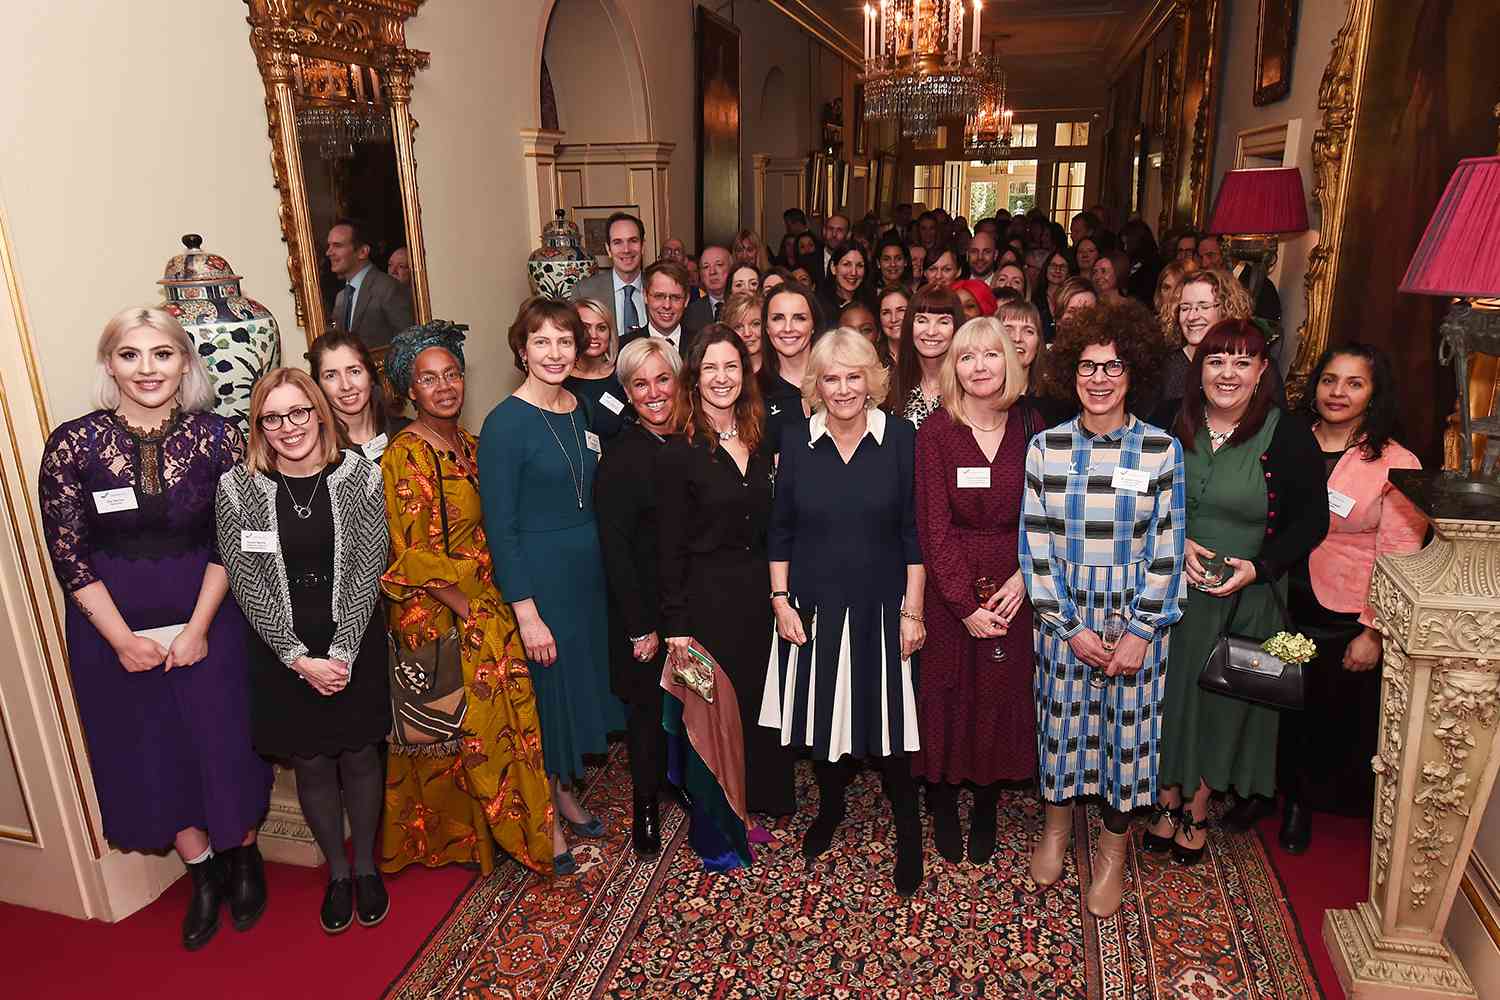 Camilla, Duchess of Cornwall poses with CEO of SafeLives Suzanne Jacob and guests of a reception to acknowledge the 15th anniversary of domestic abuse charity SafeLives at Clarence House on February 12, 2020 in London, England